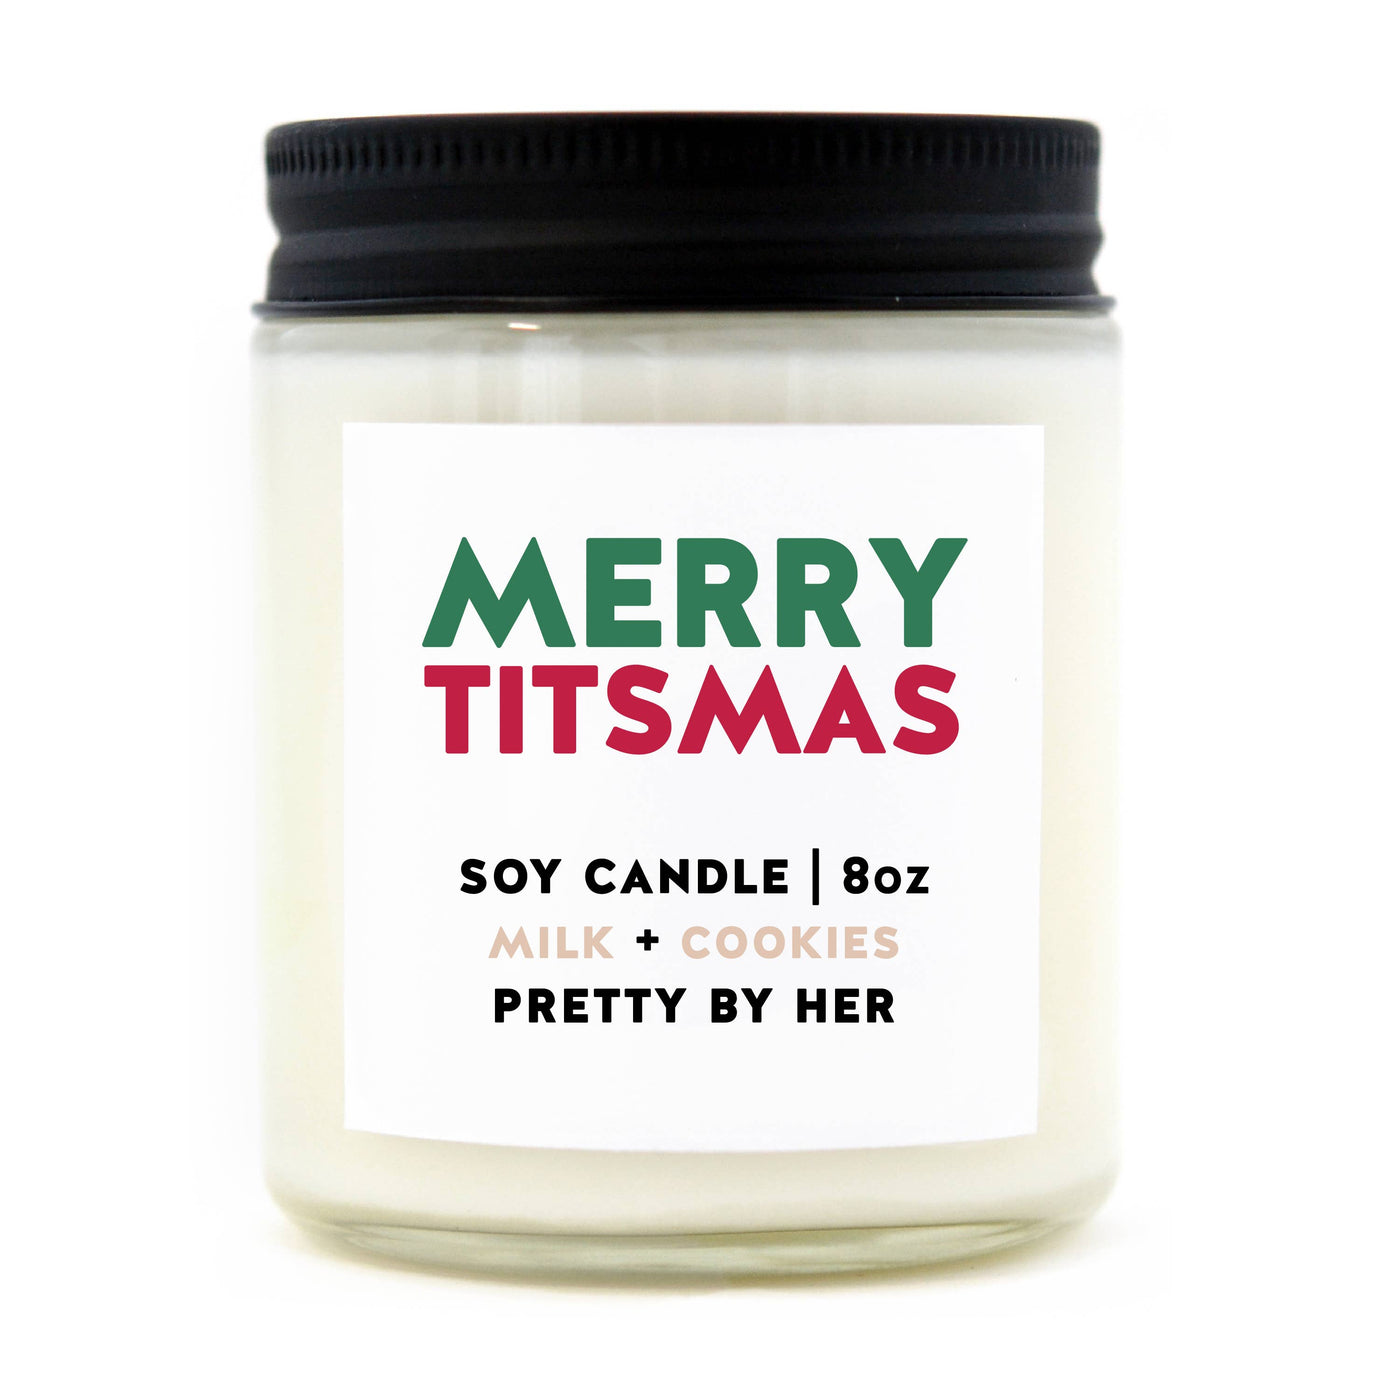 MERRY TITSMAS CANDLE